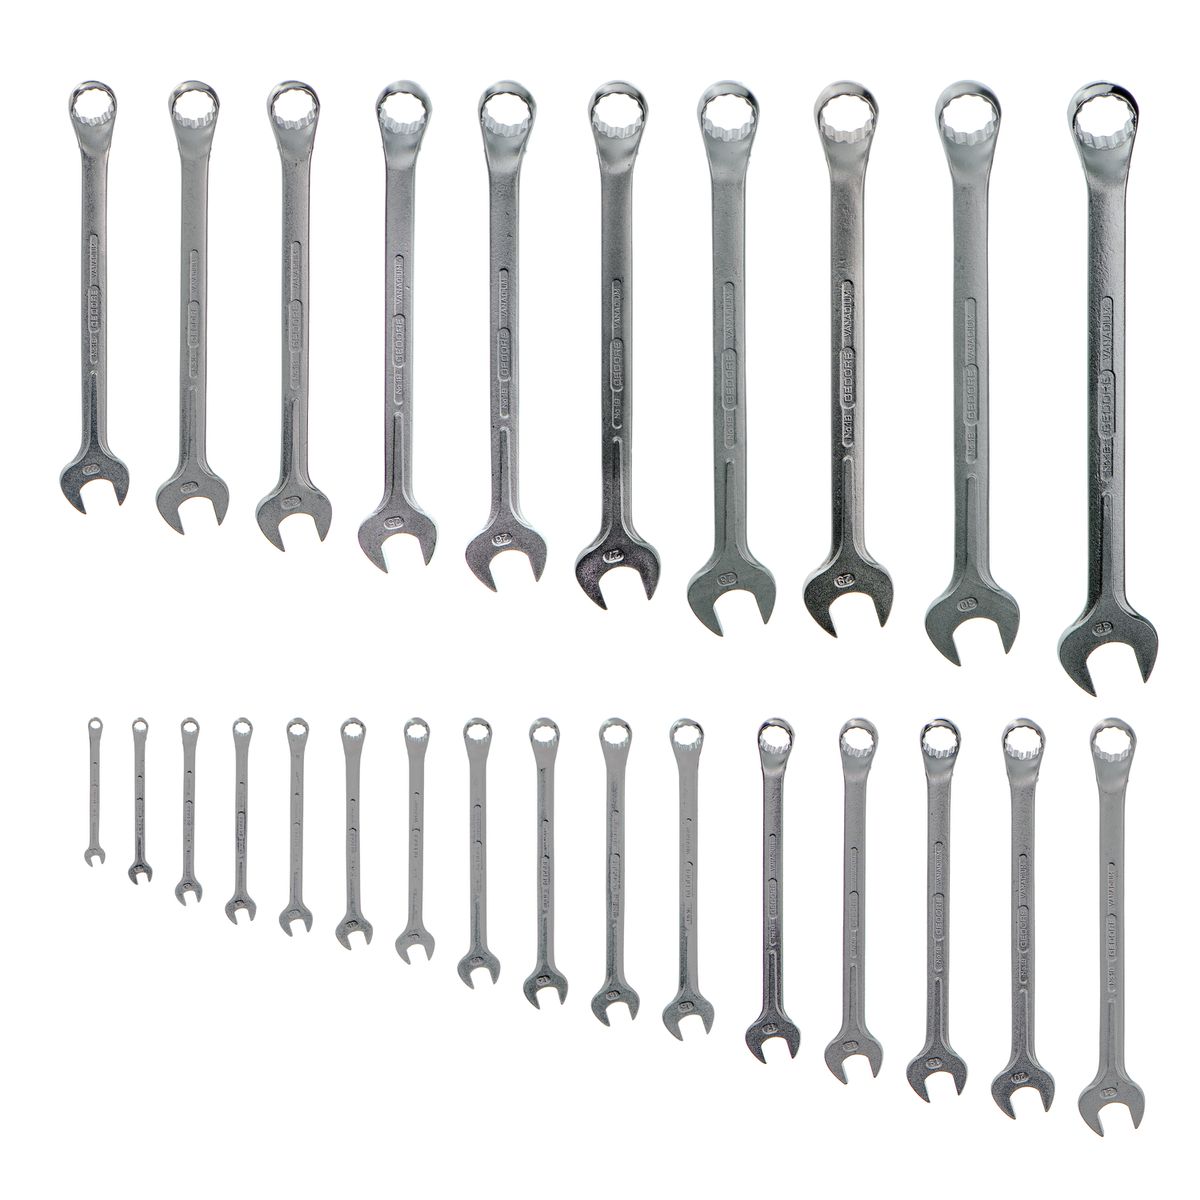 Gedore Metric Combination Spanner Set 1B-26M Power Tool Services